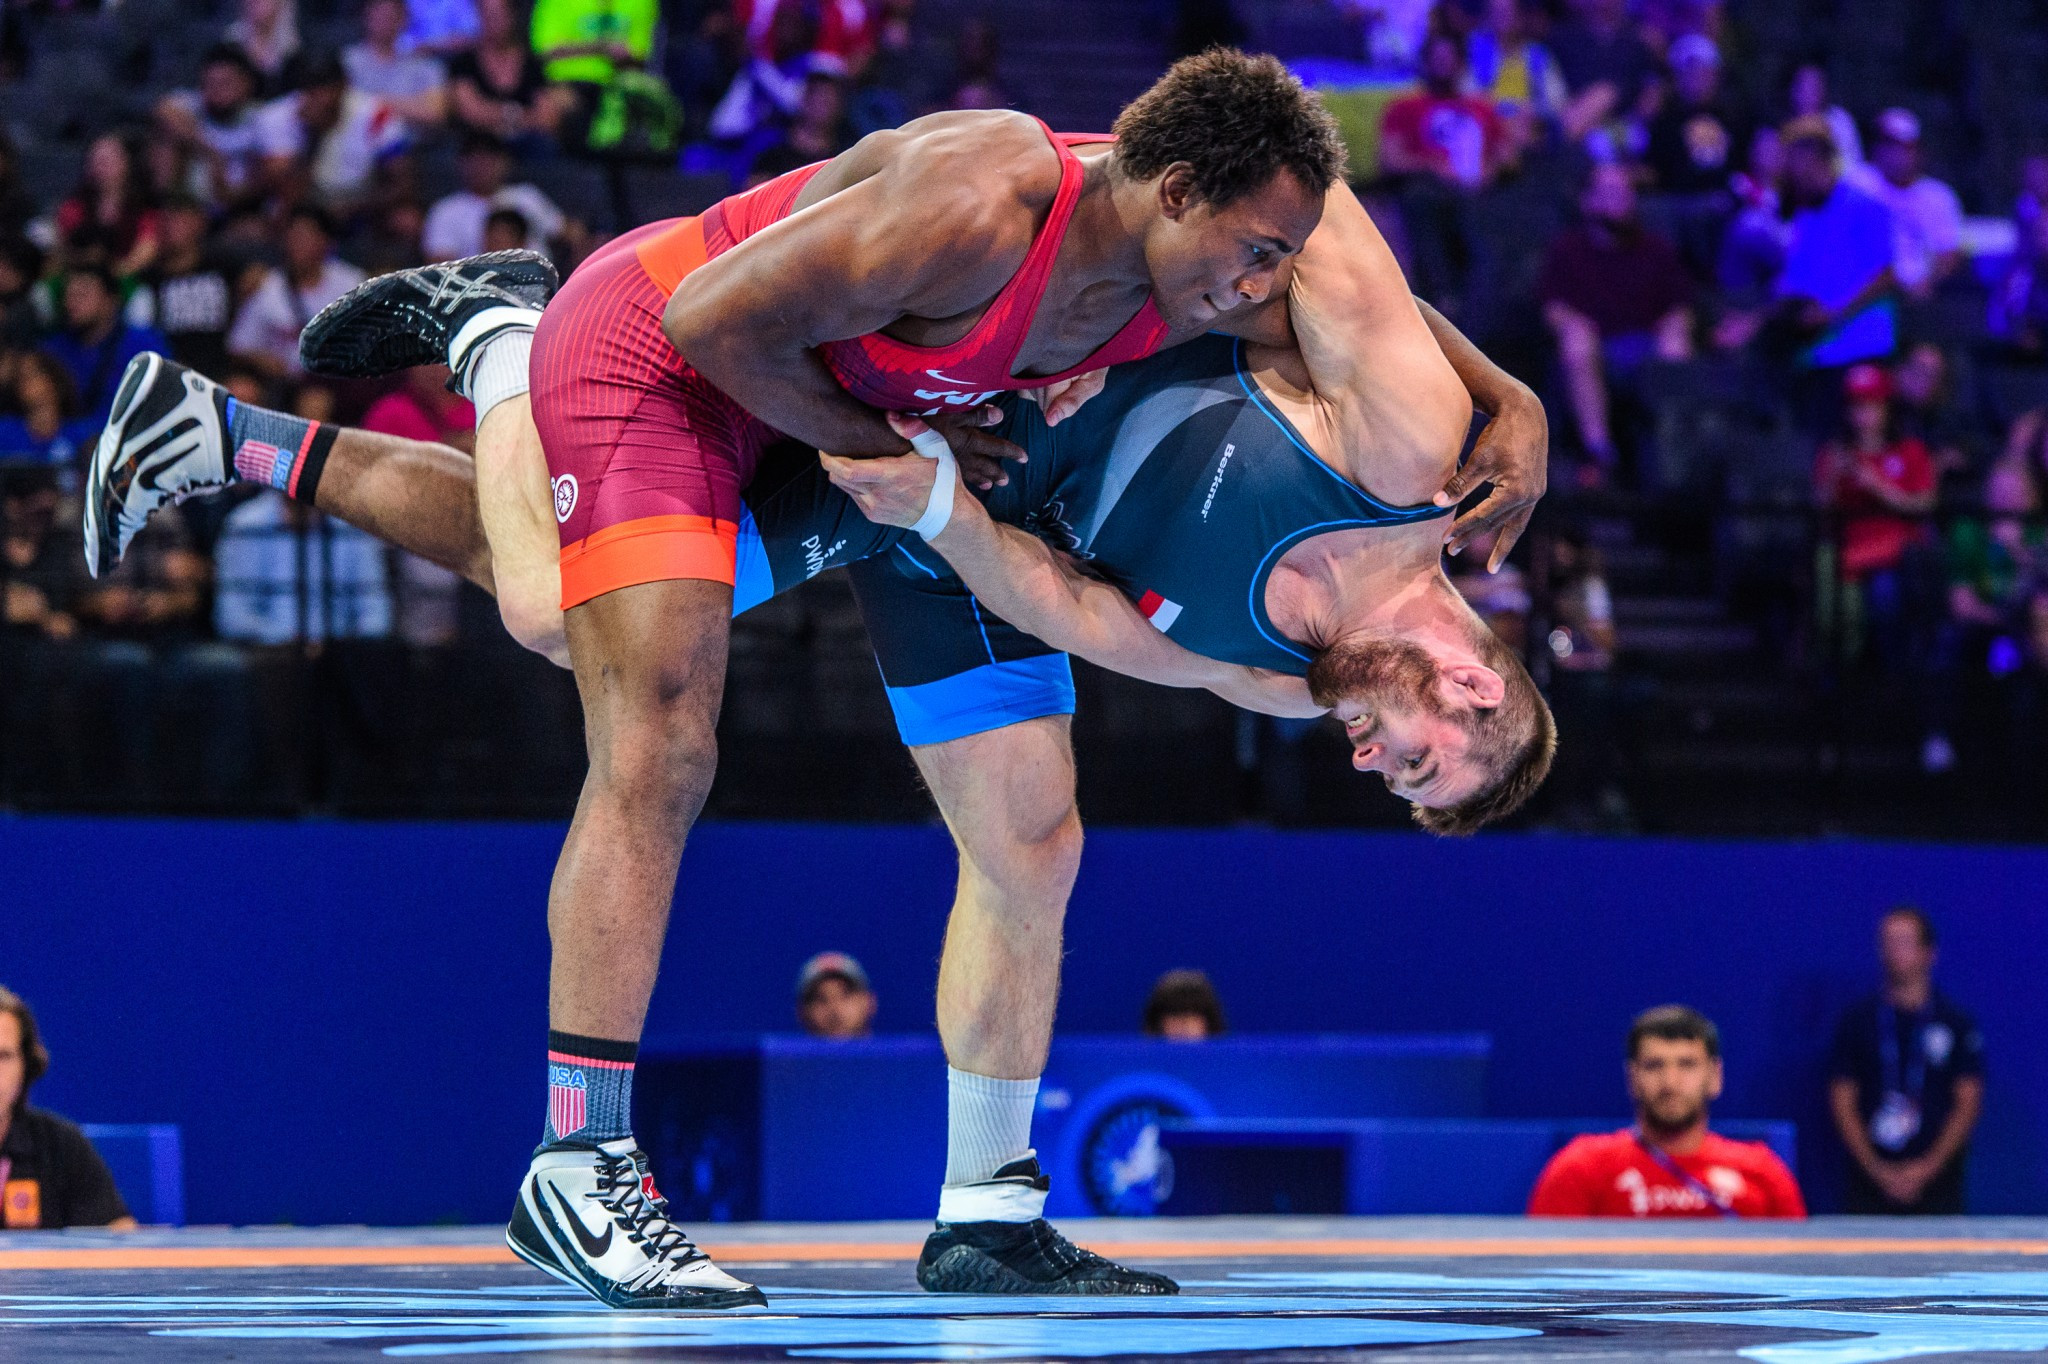 Olympic bronze medallist J'Den Cox claimed a podium finish for the United States ©UWW